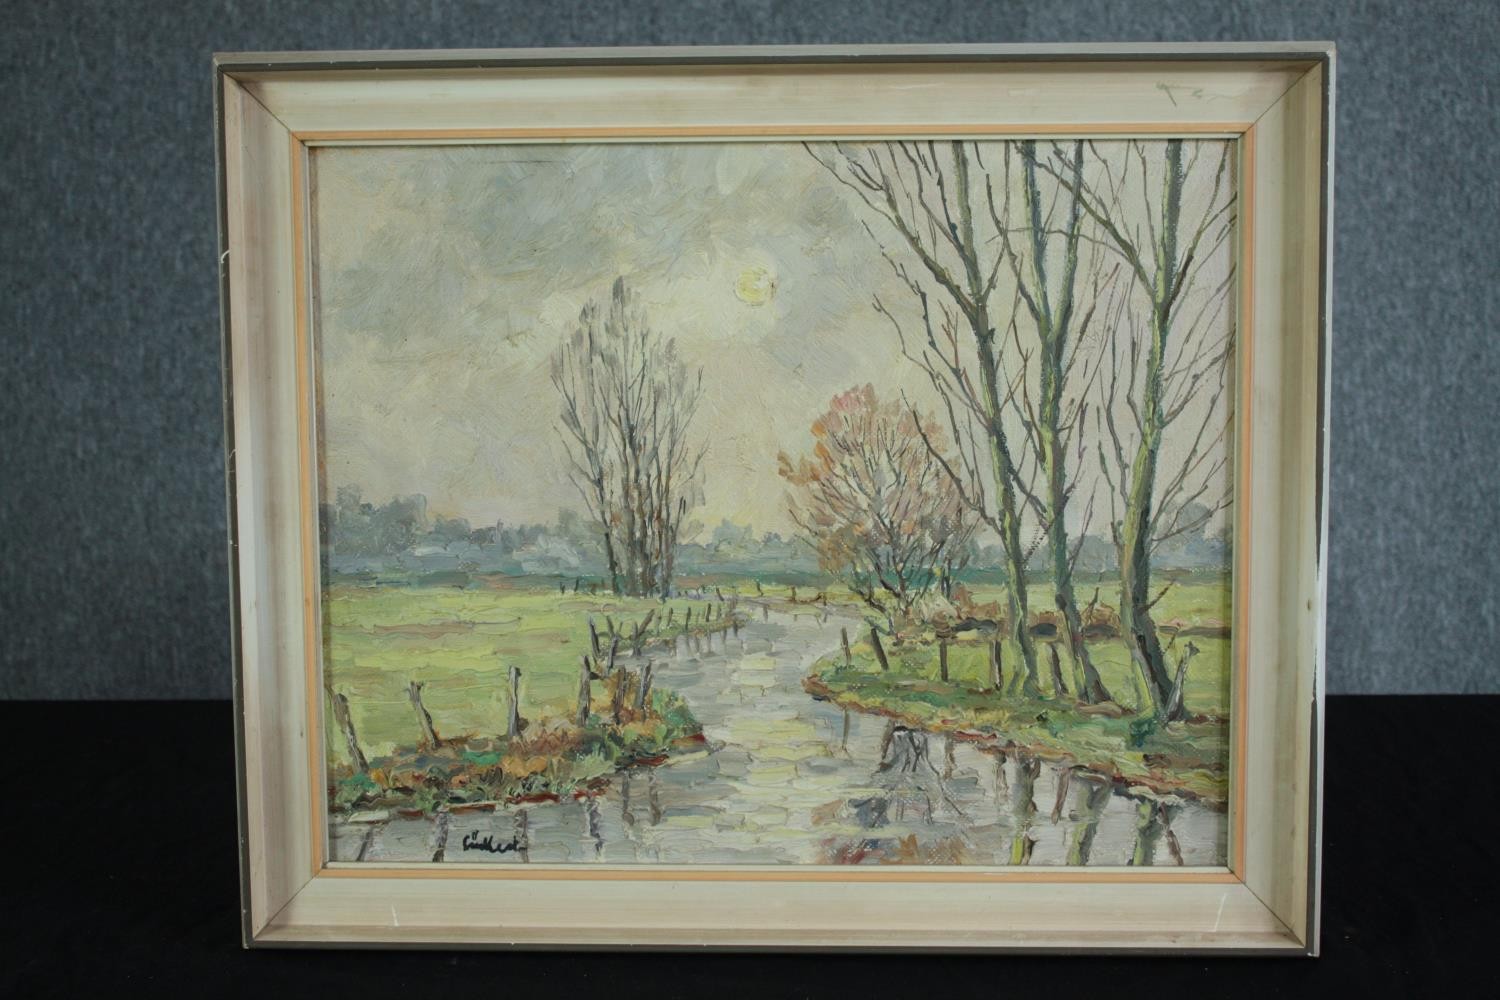 Oil painting on board. Landscape. Signed indistinctly lower right. Framed. H.48 W.58 cm. - Image 2 of 4